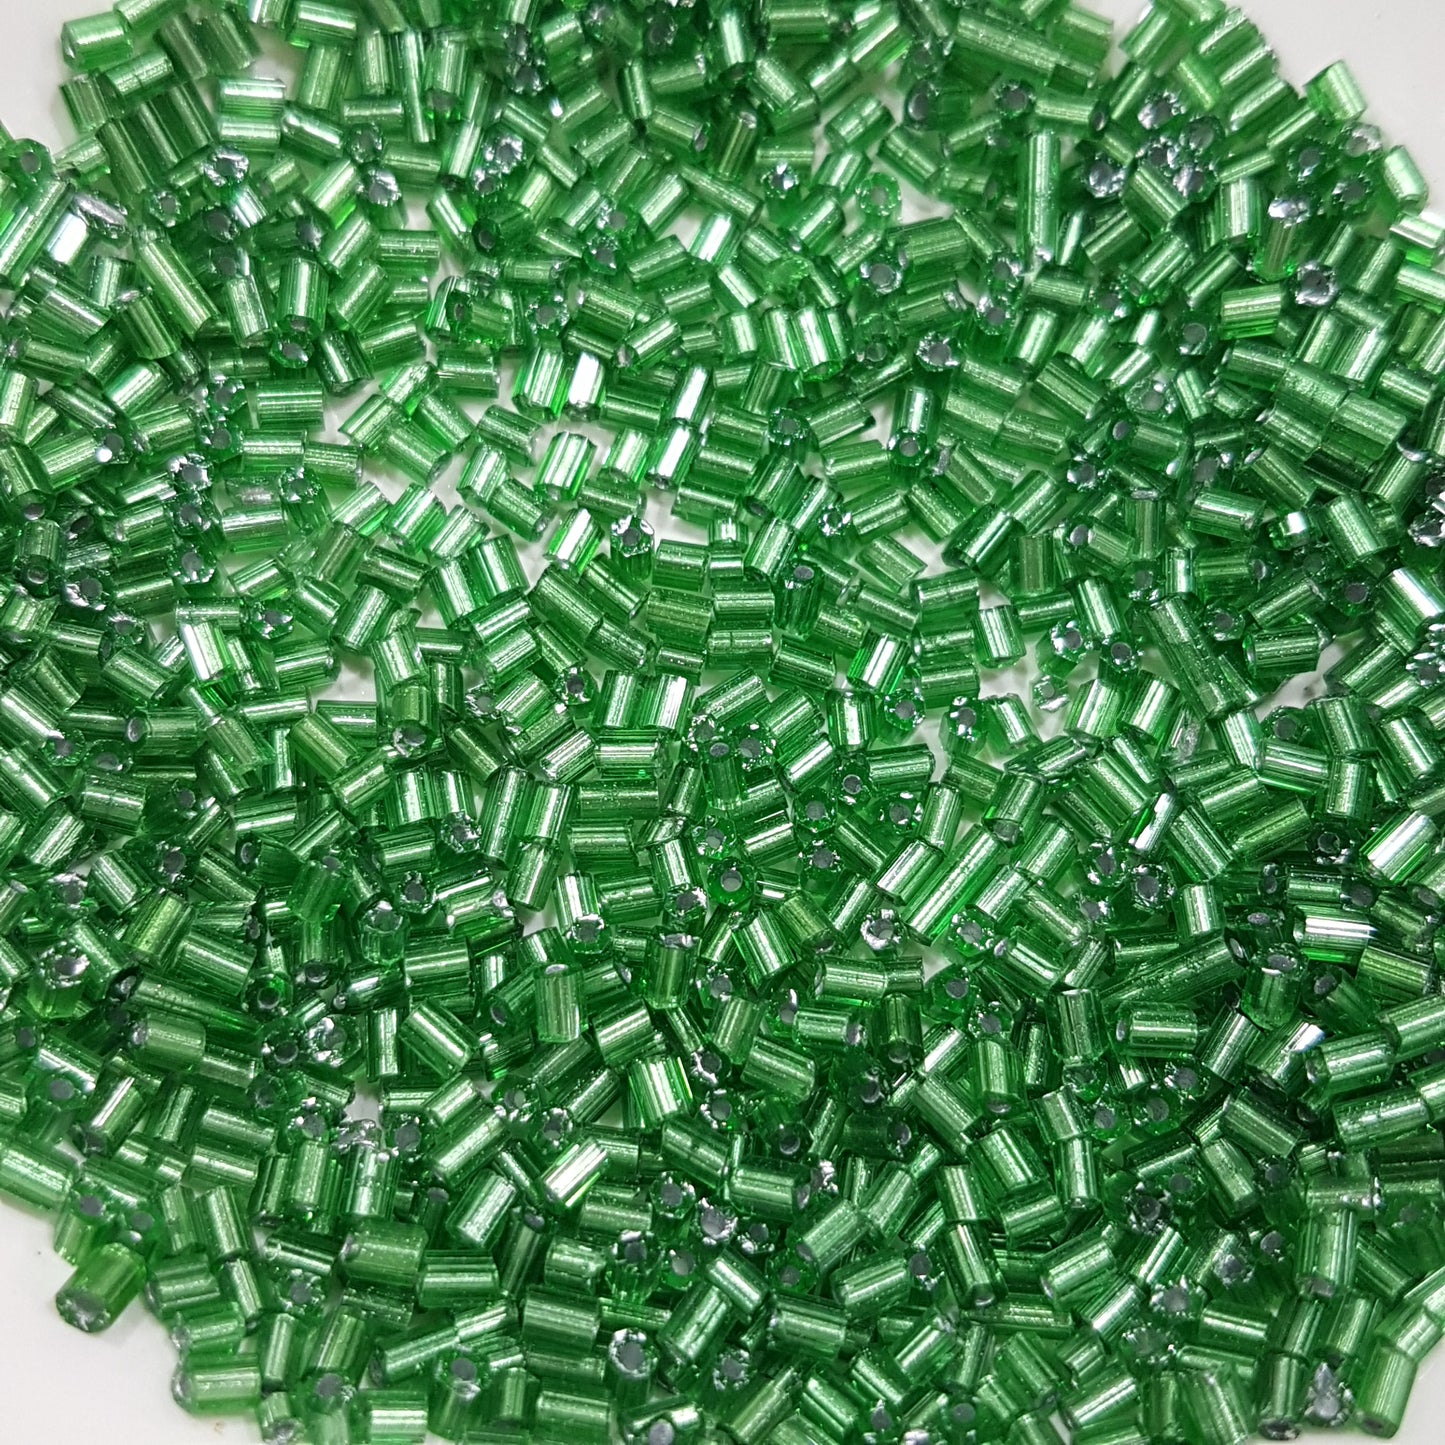 15g 11/0 Green S/L Seed Beads